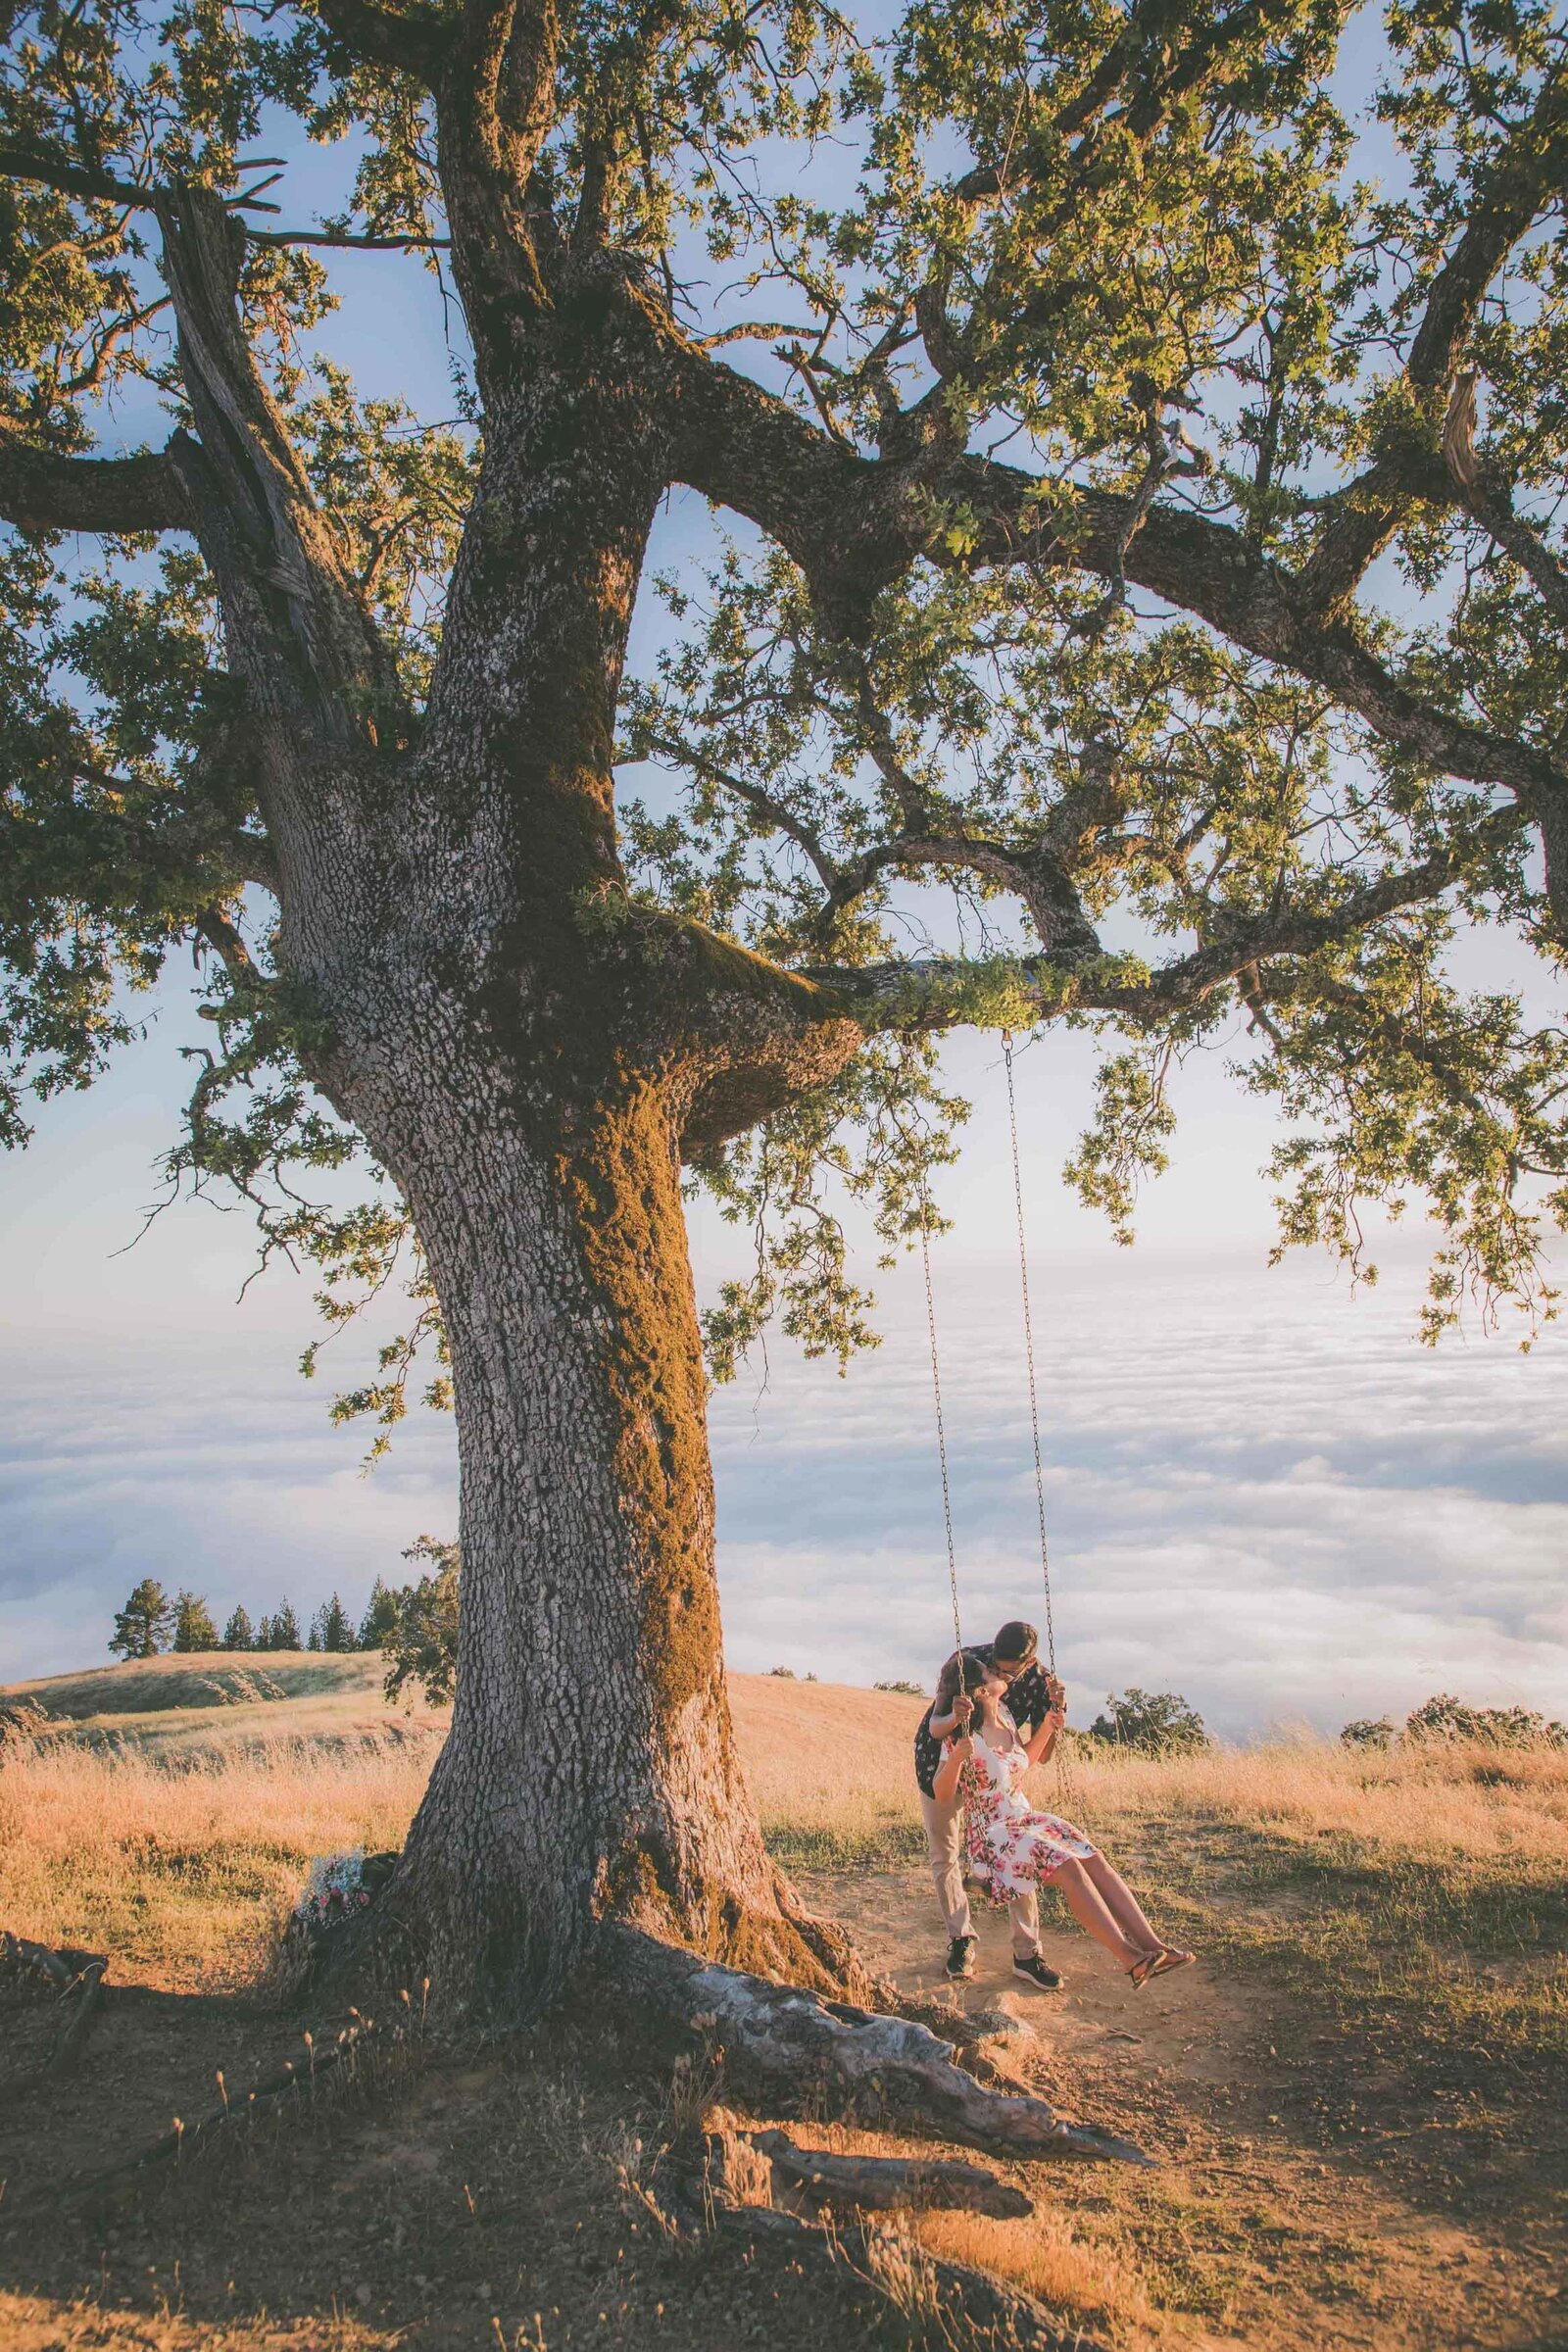 Couple kisses on swing set under a tree during sunset.